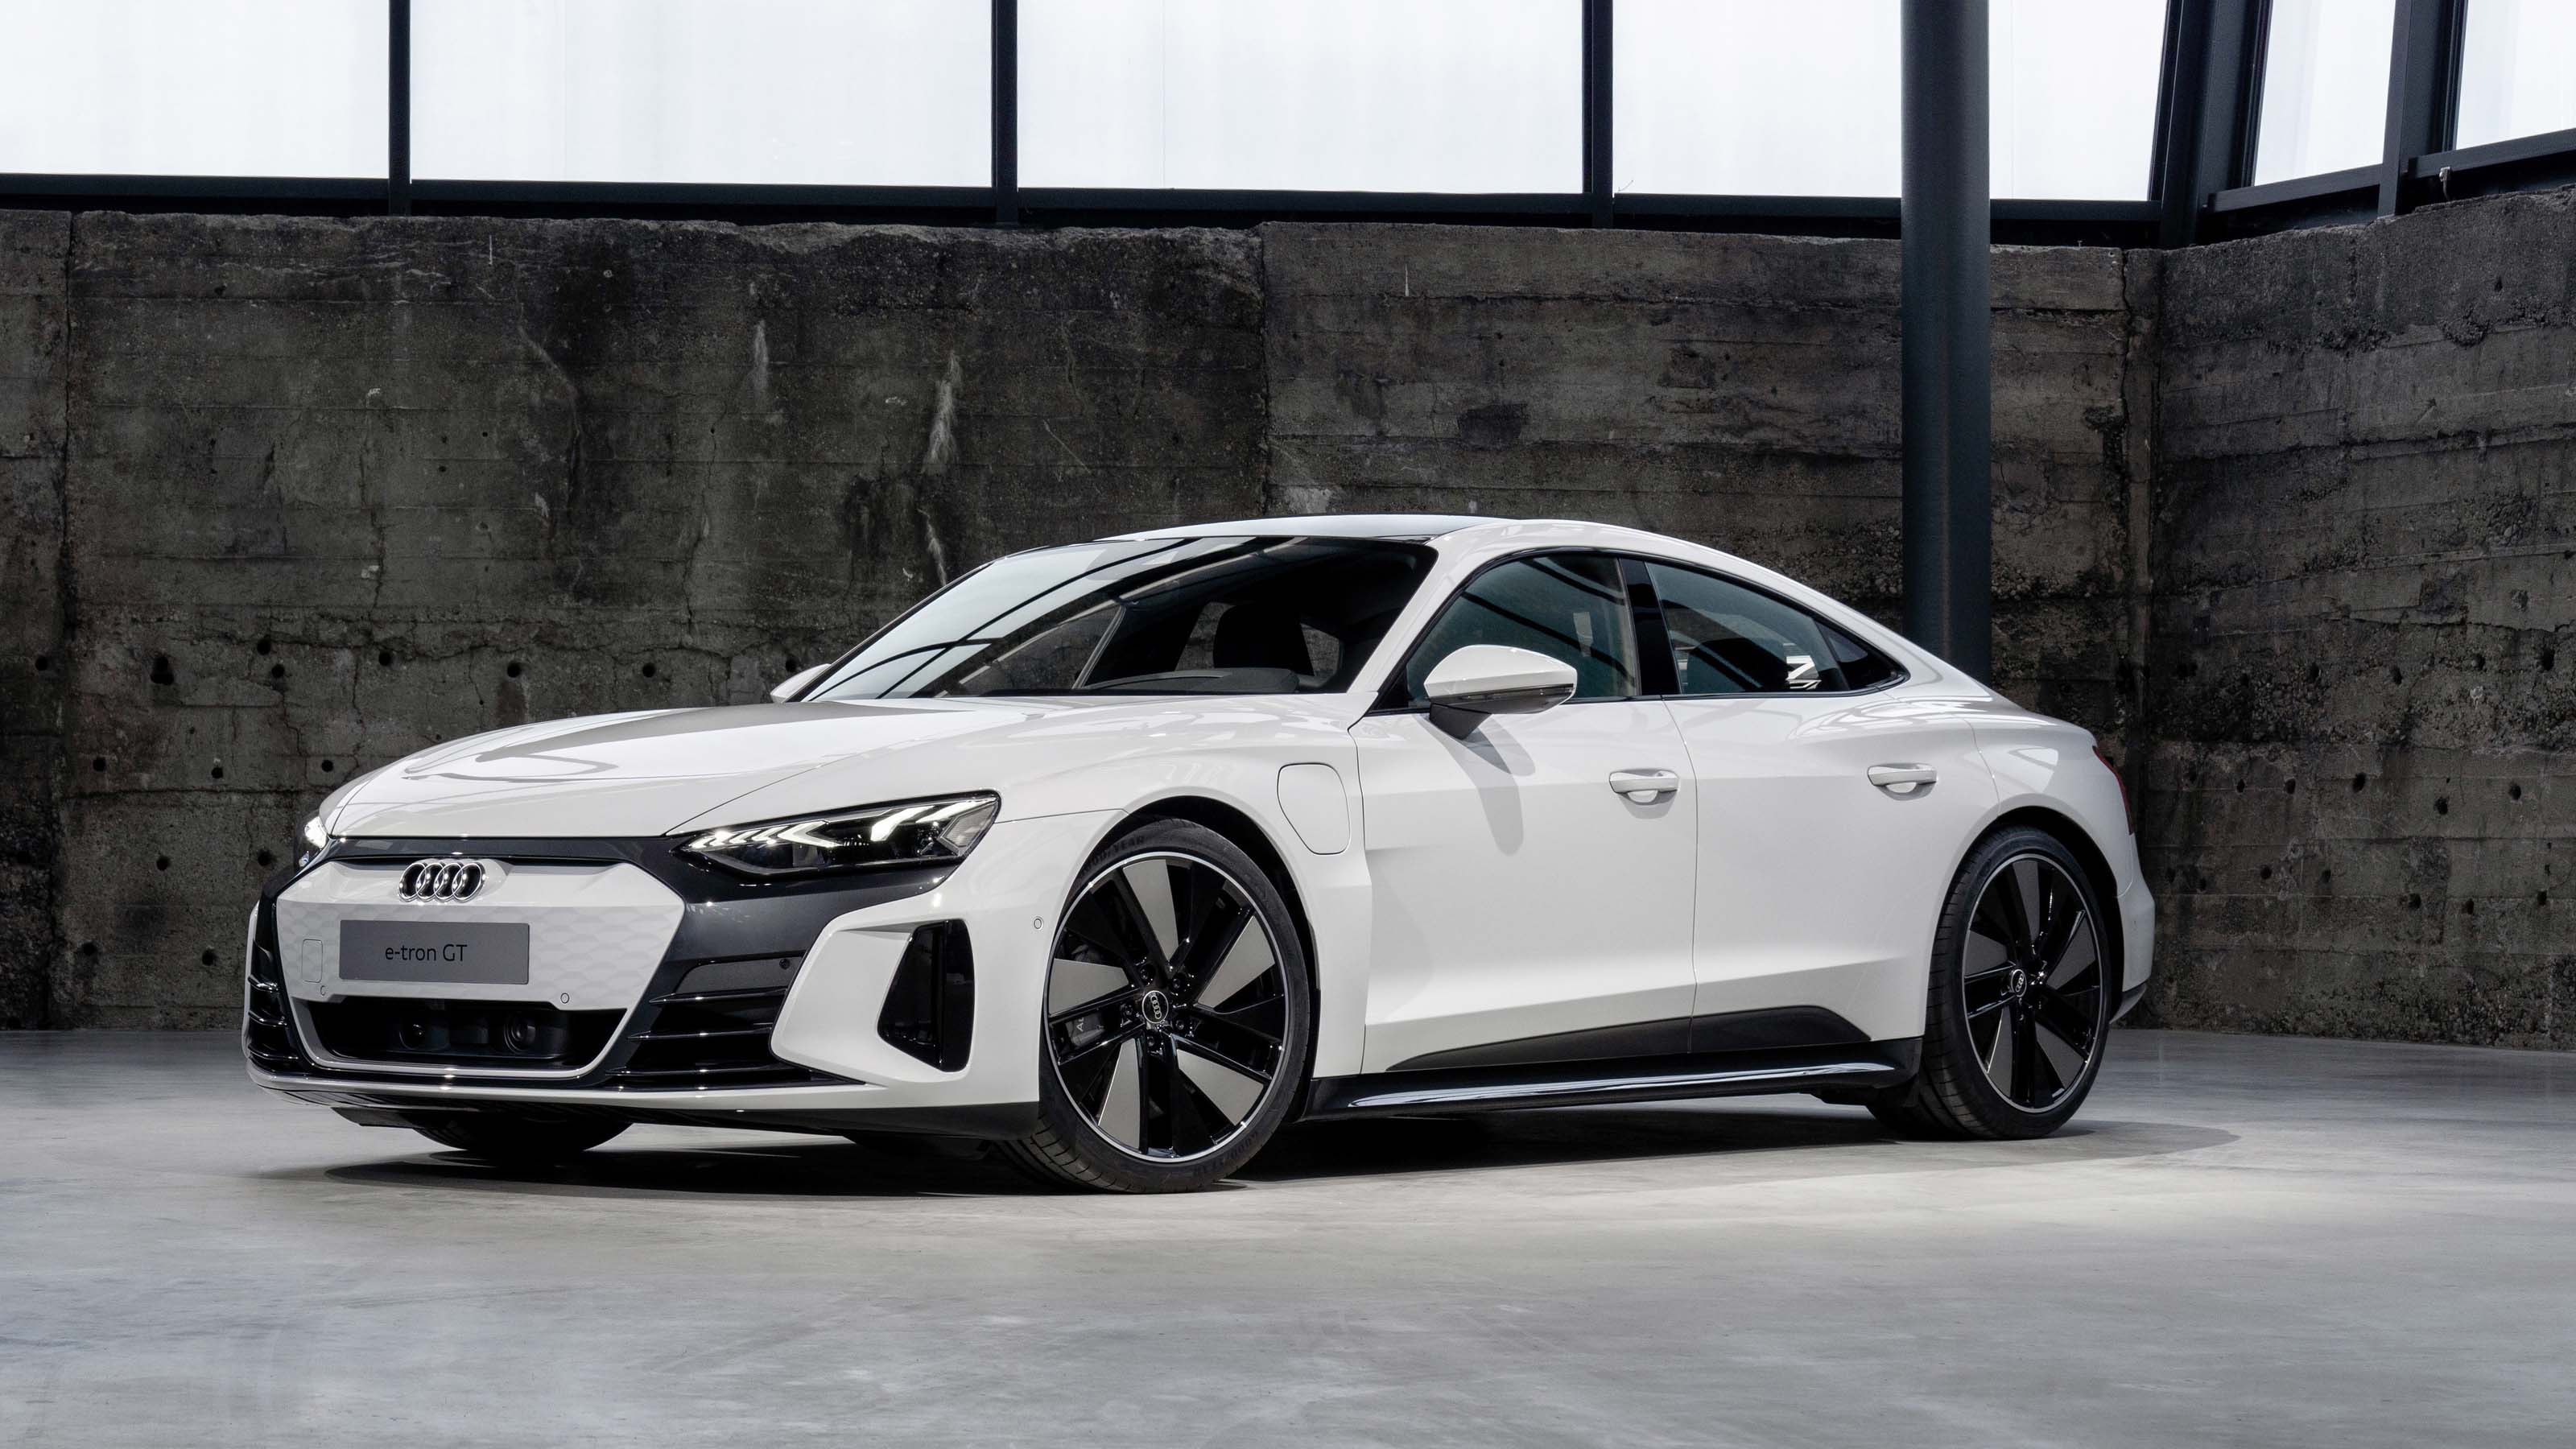 21 Audi E Tron Gt Specs Price Release Date Prototype Review Drivingelectric